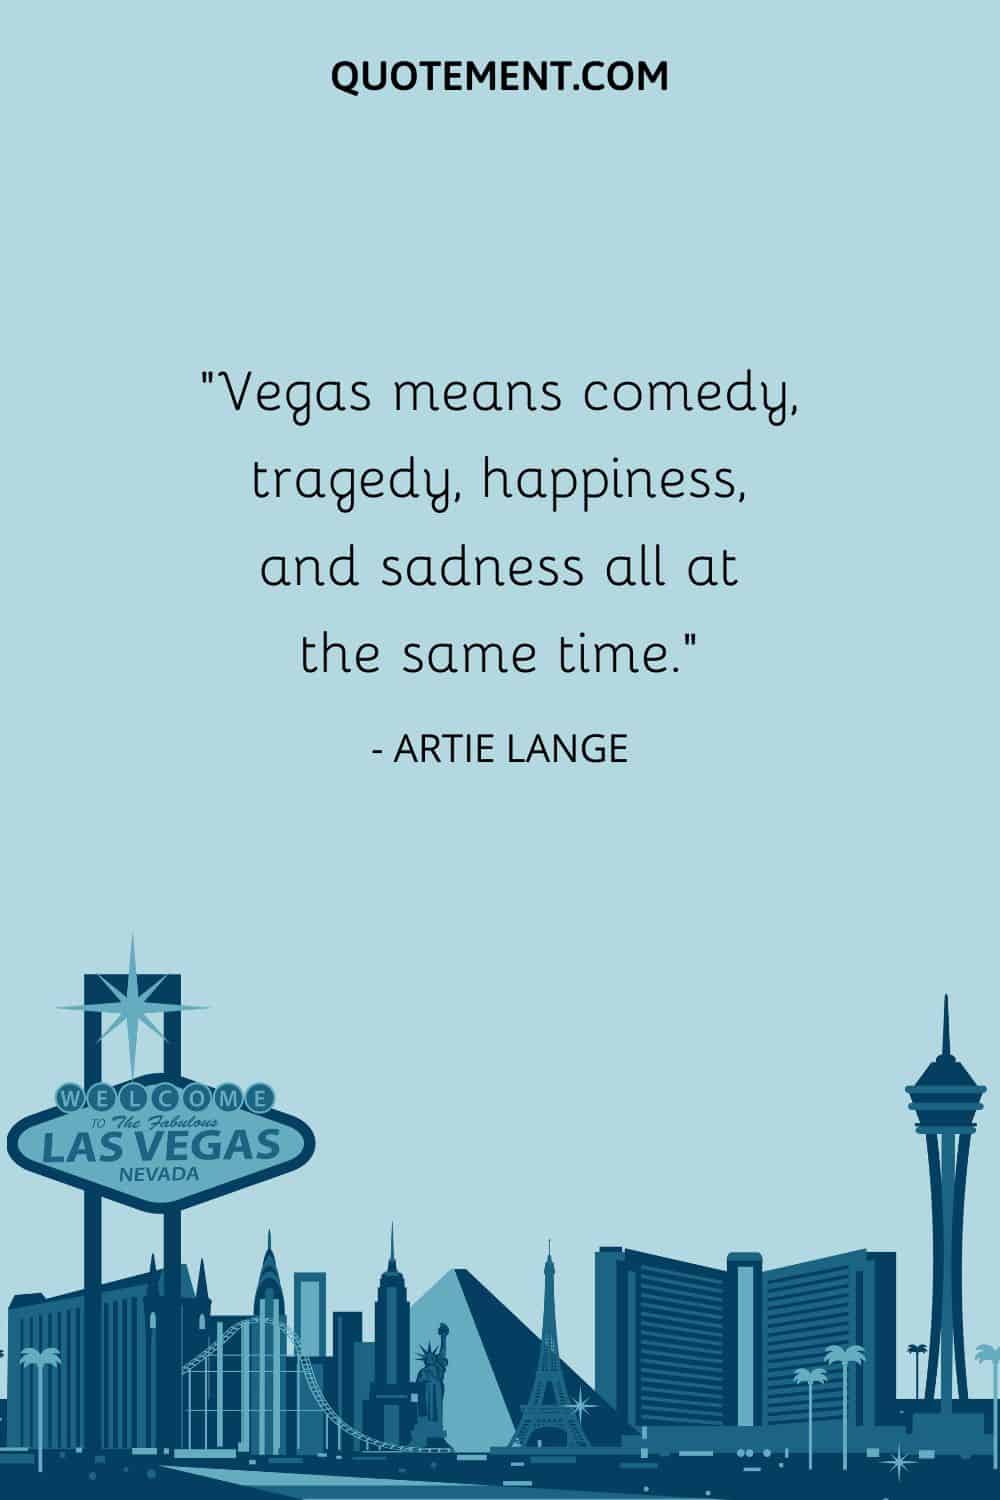 “Vegas means comedy, tragedy, happiness, and sadness all at the same time.” — Artie Lange